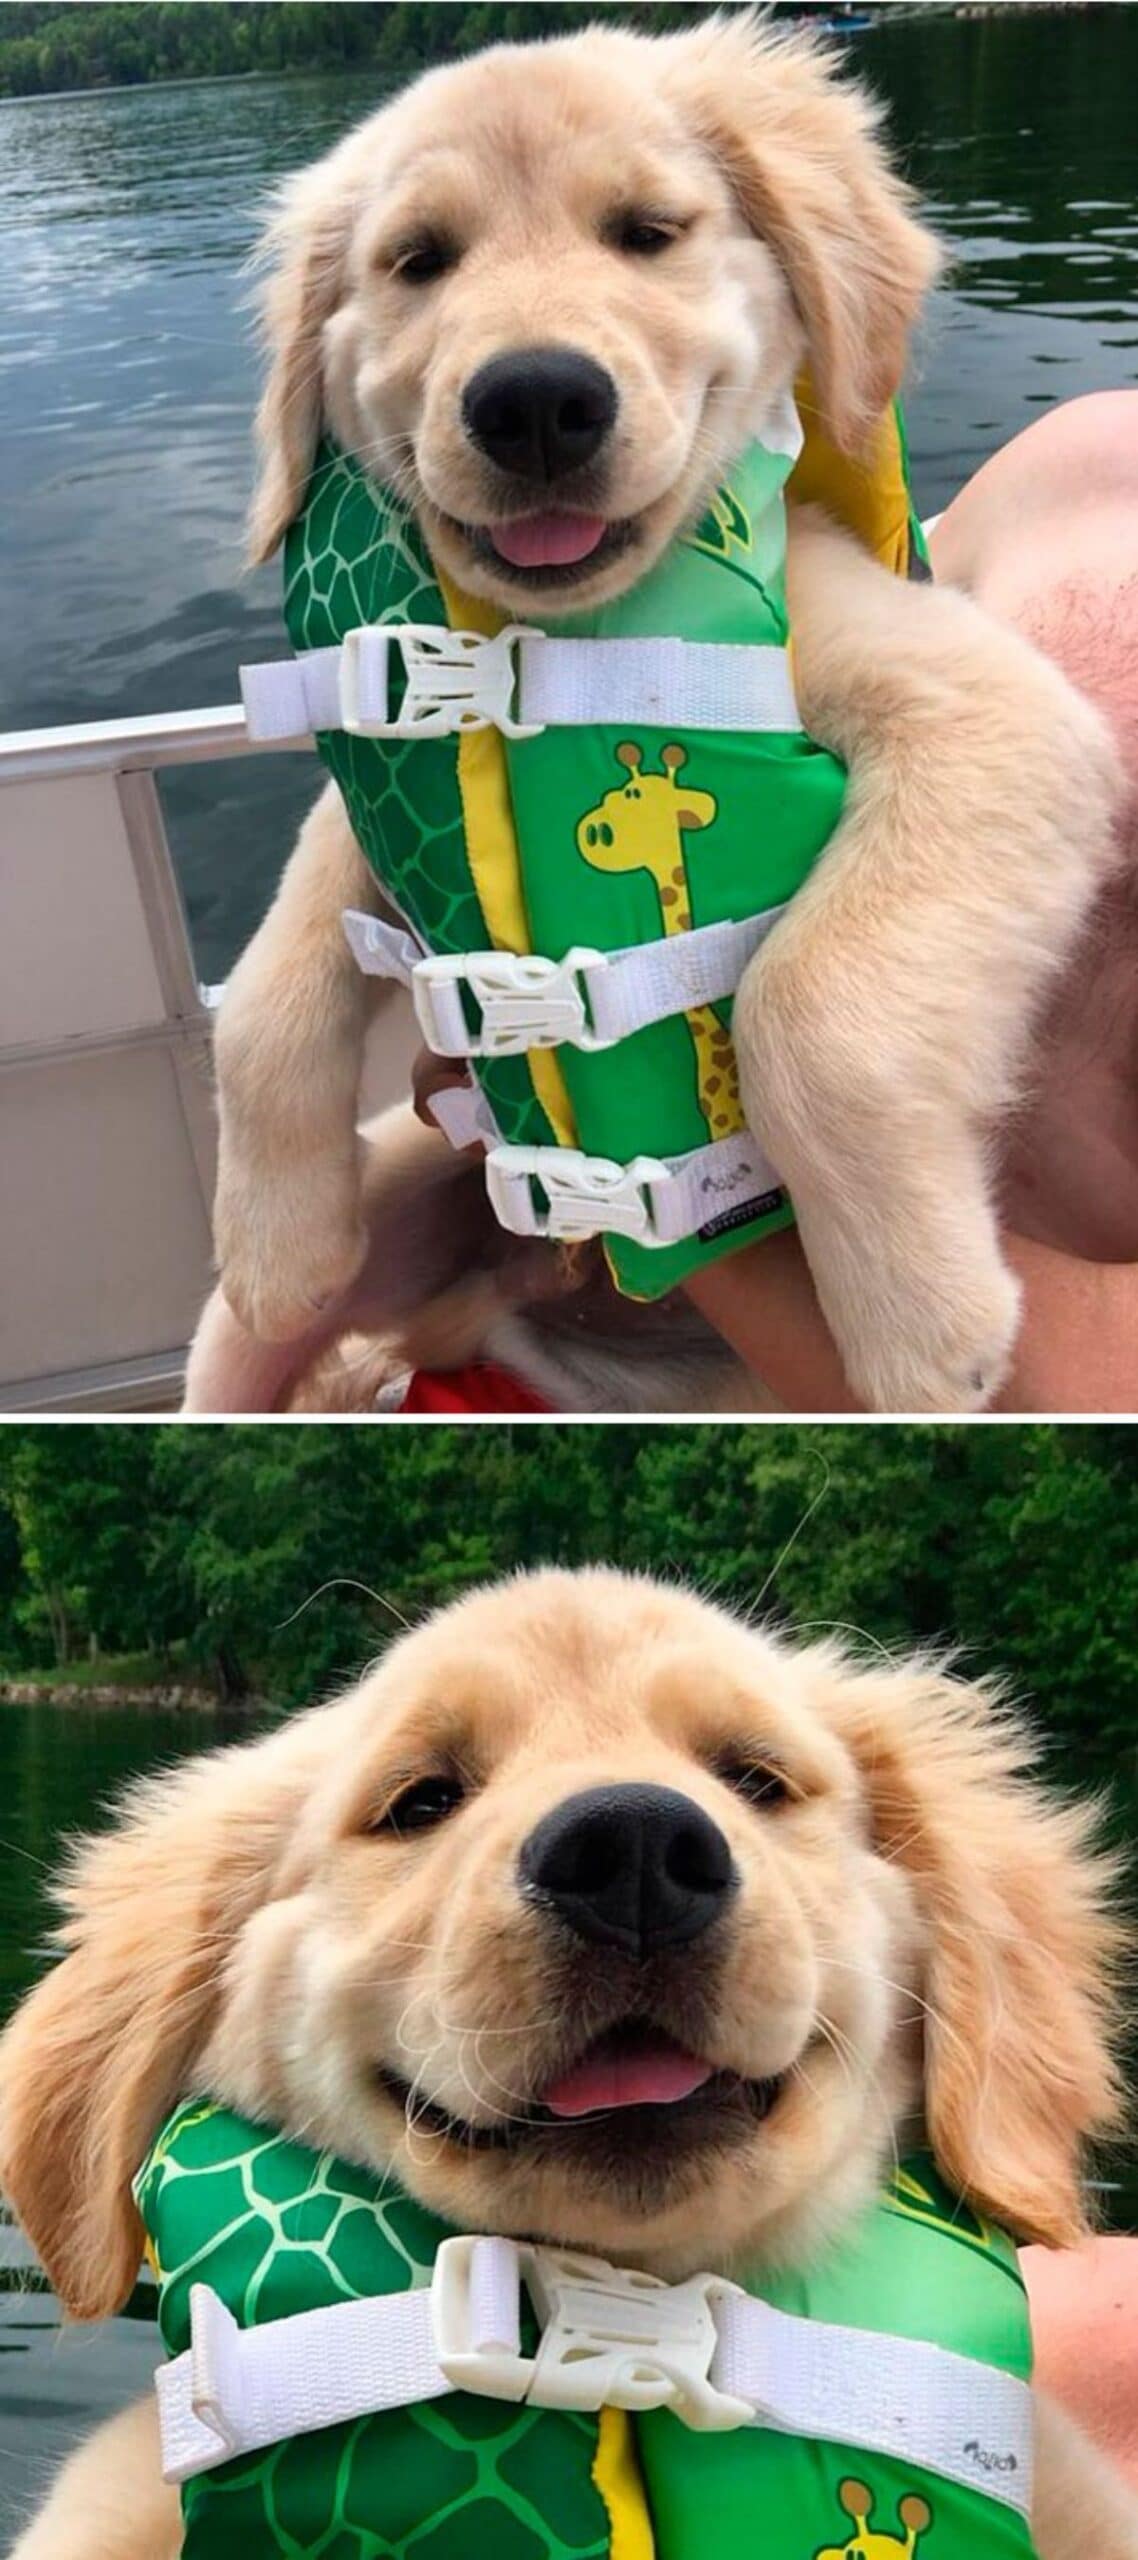 2 photos of a golden retriever puppy wearing a green yellow and white vest on a boat